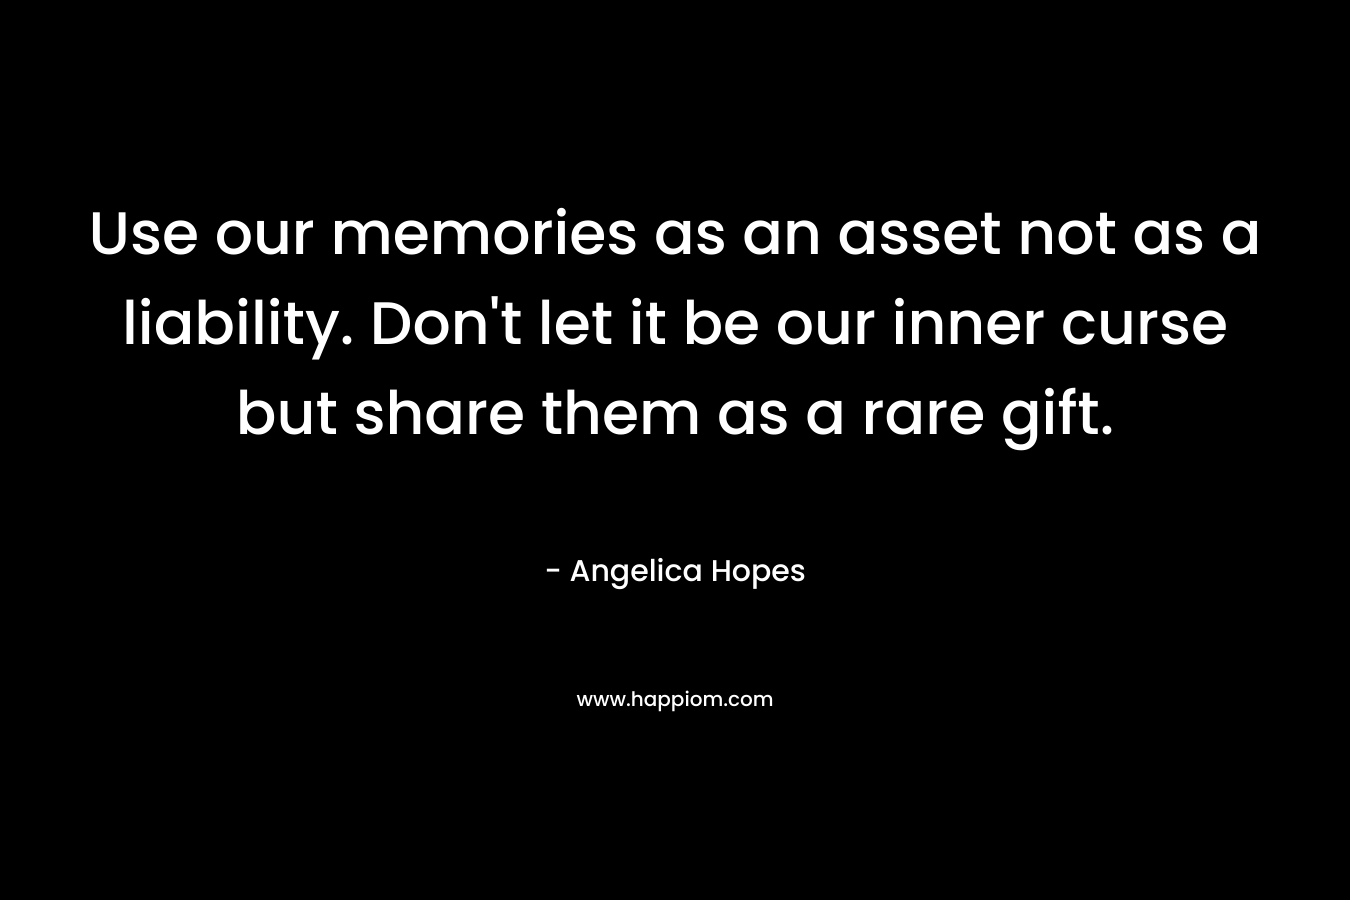 Use our memories as an asset not as a liability. Don’t let it be our inner curse but share them as a rare gift. – Angelica Hopes